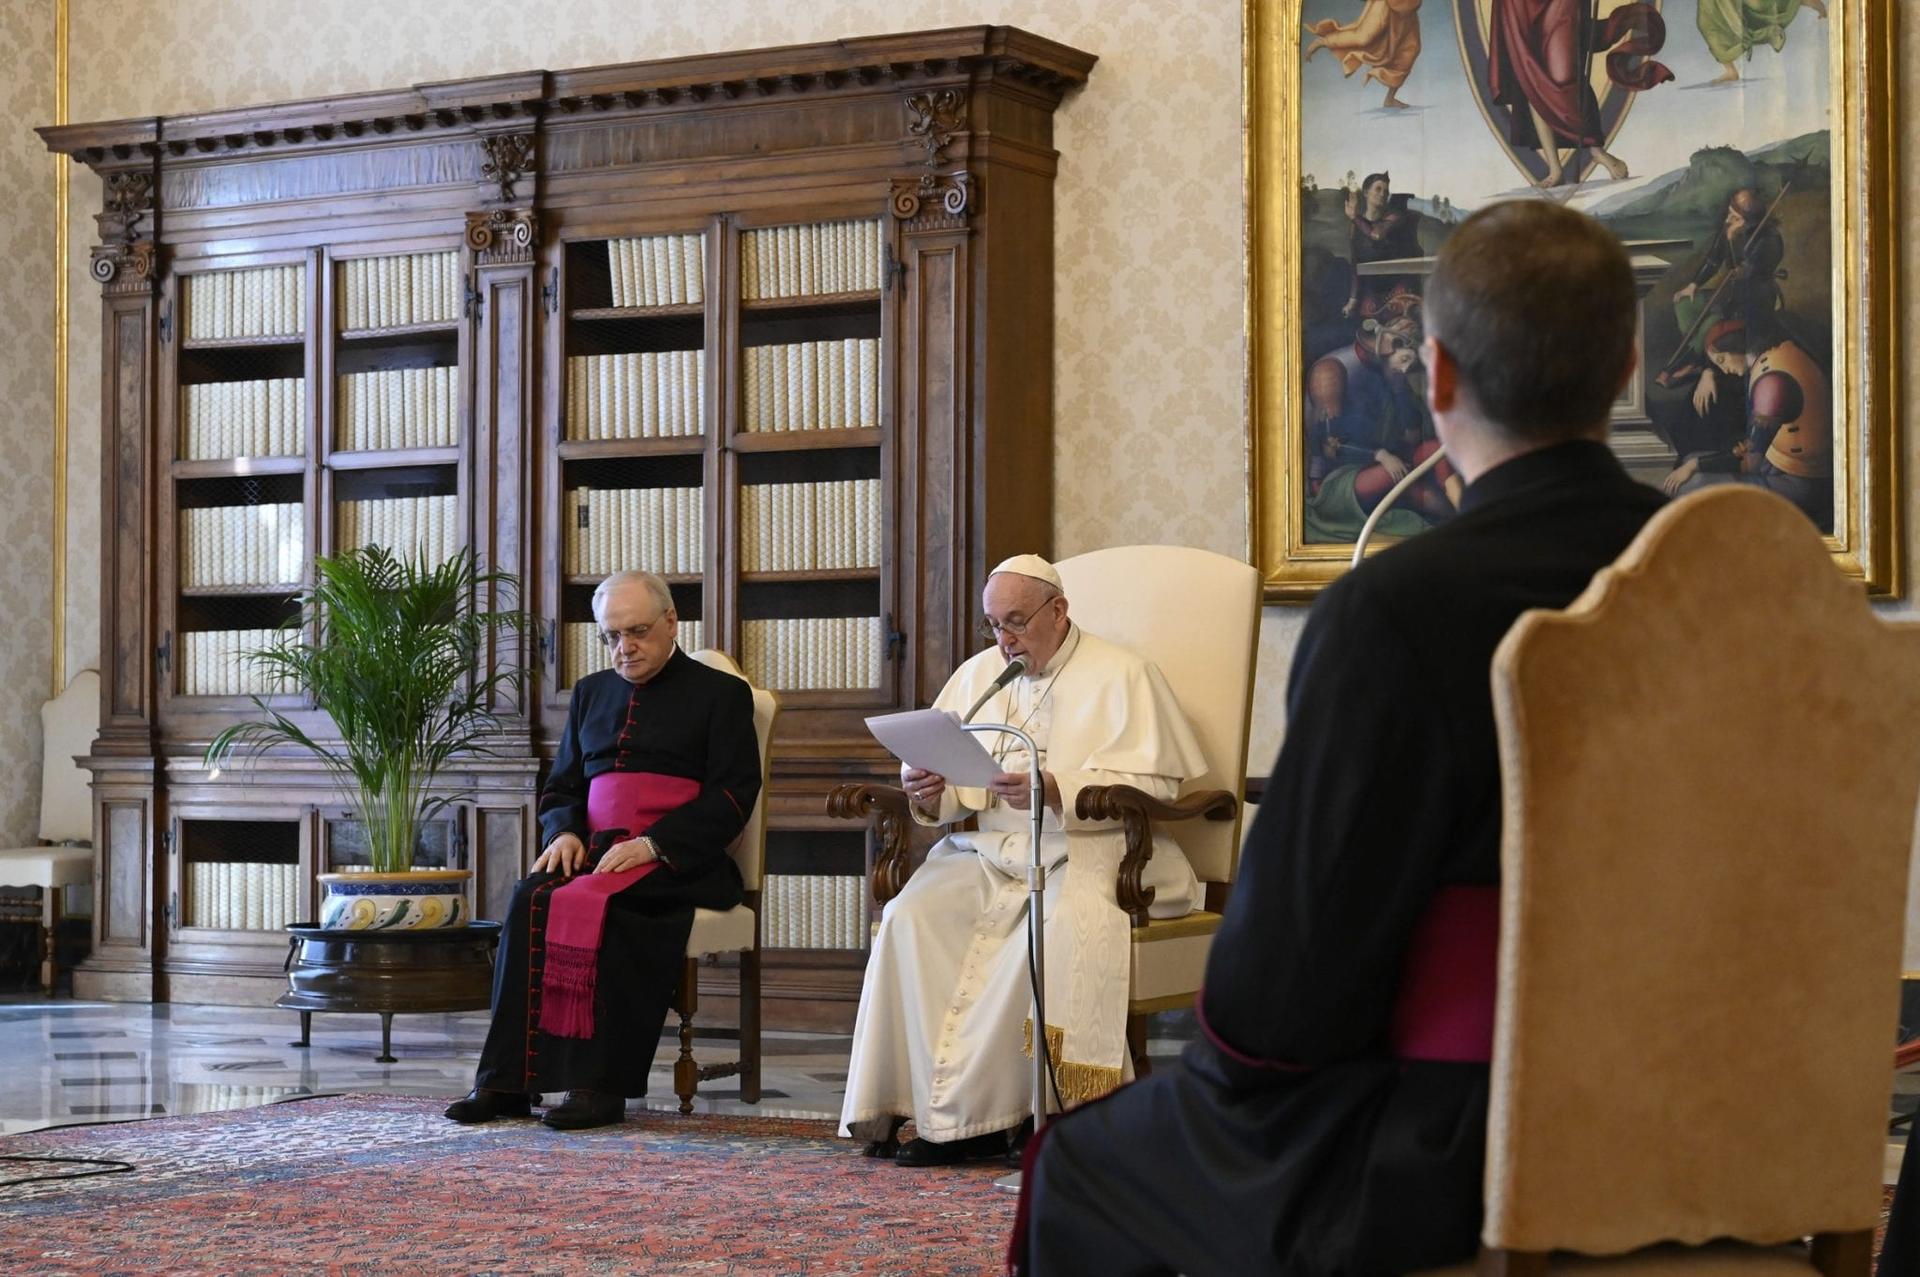 Christ’s peace is reflected in acts of love, reconciliation, pope says